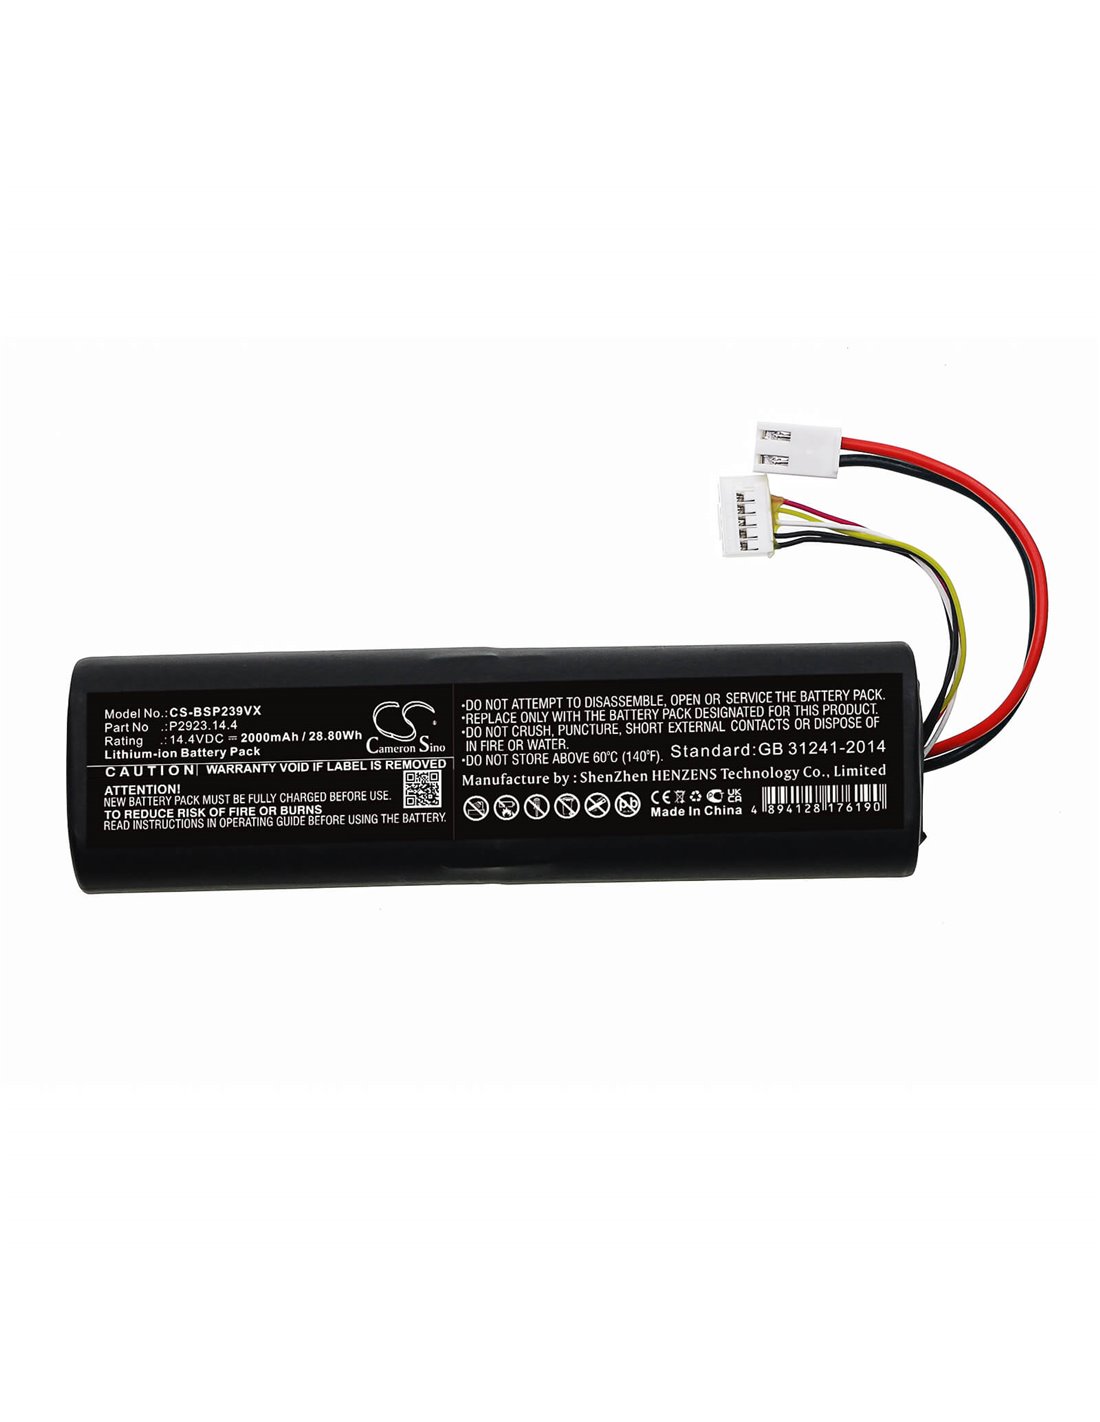 14.4V, Li-ion, 2000mAh, Battery fits Bissell, 2390A, 28.80Wh